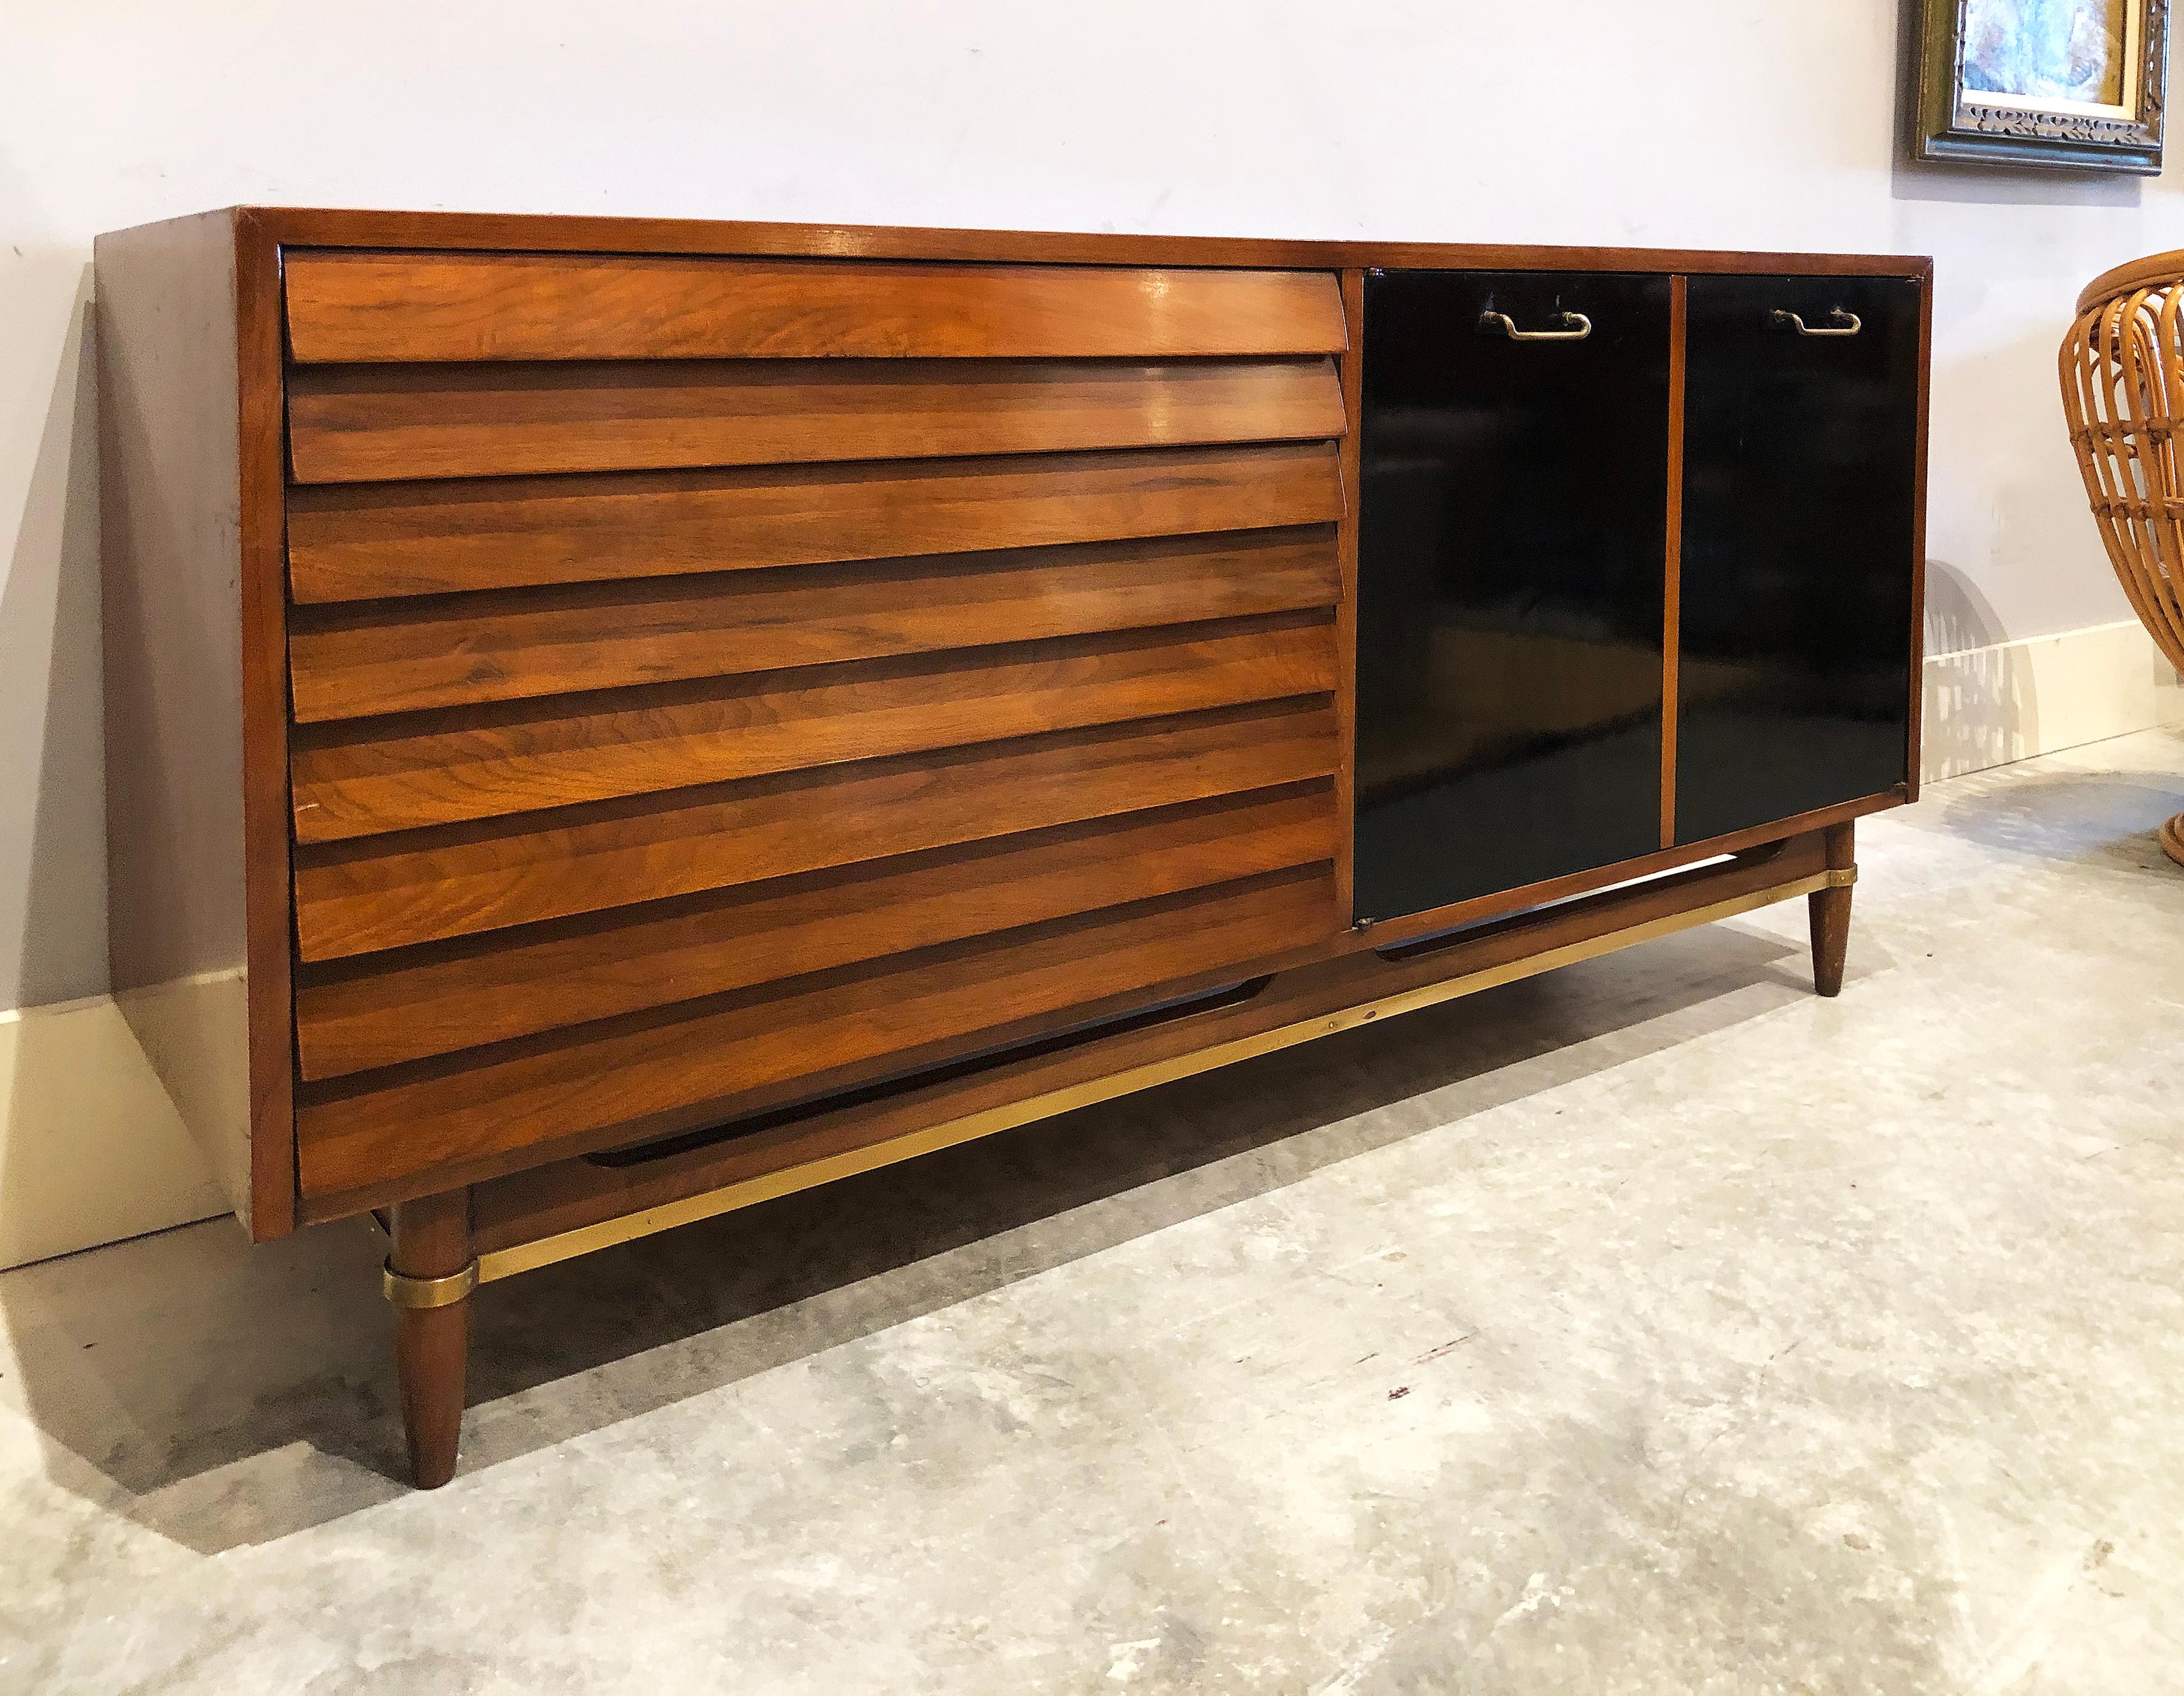 1950s Merton Gershun American of Martinsville credenza cabinet

Offered for sale is a 1950s stunning credenza/cabinet/dresser by Merton Gershun for American of Martinsville. Behind two doors with black laminate are drawers and open shelves. To the